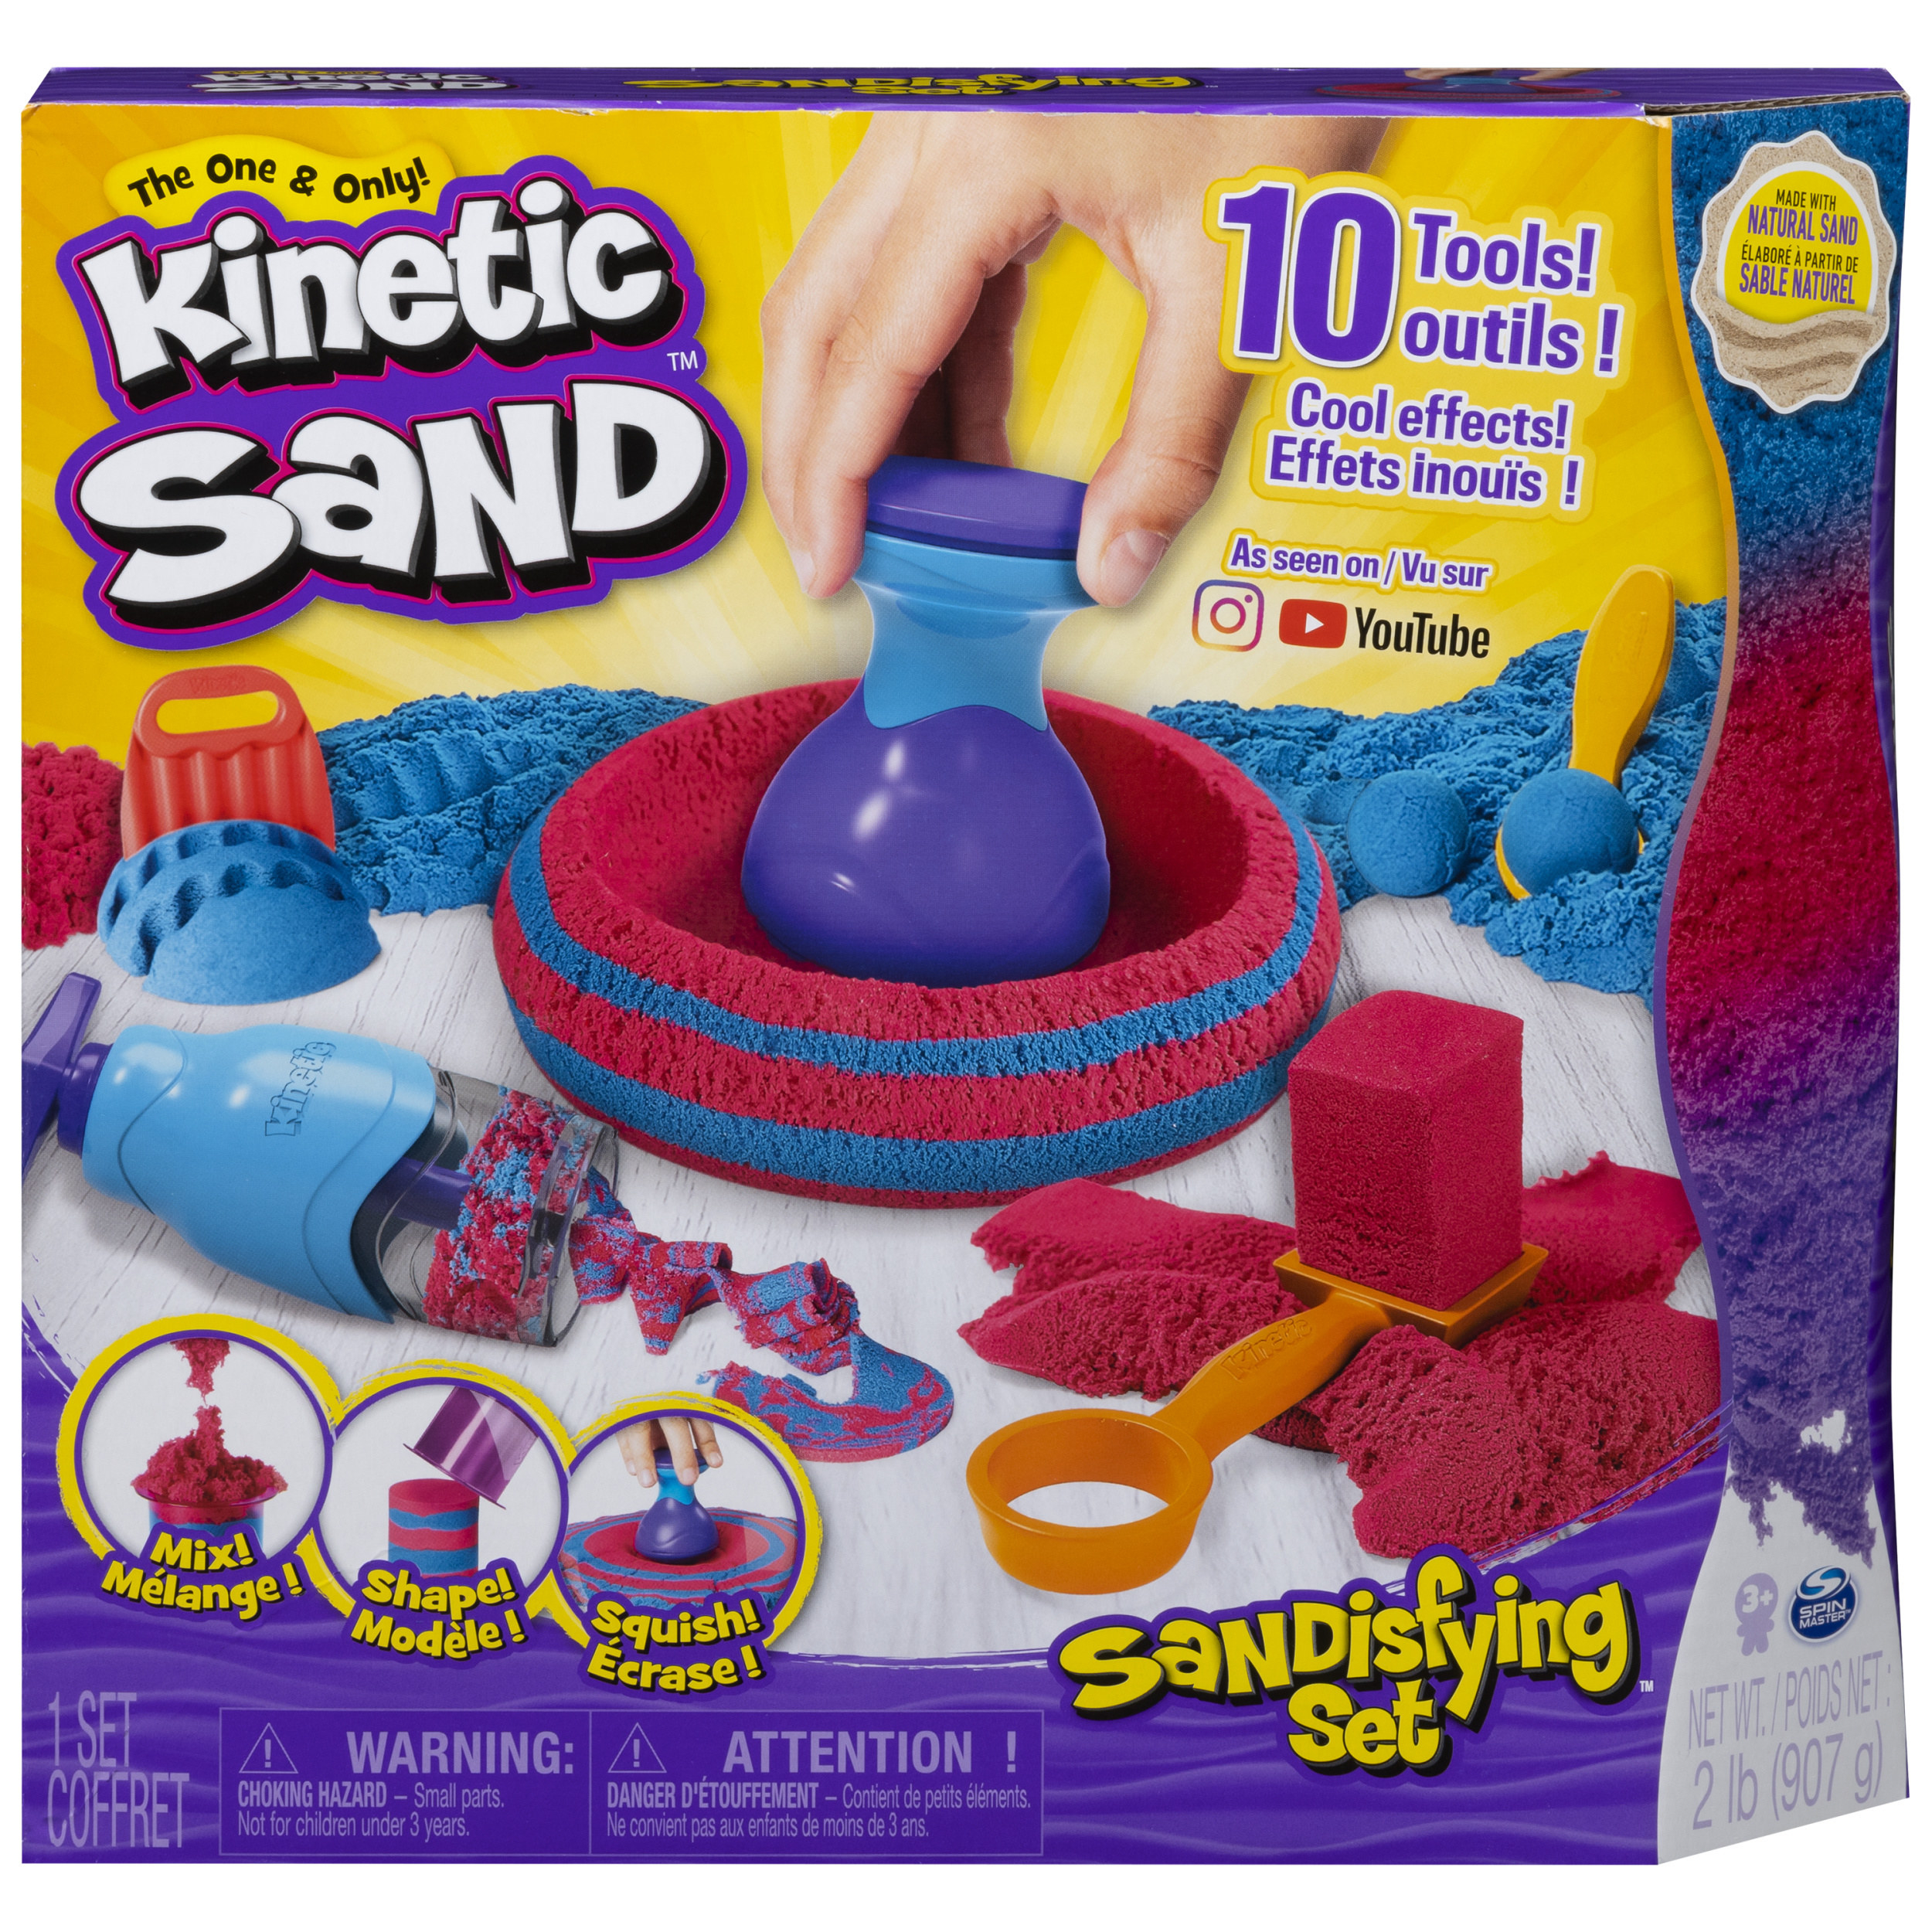 The brightly colored playset packaging